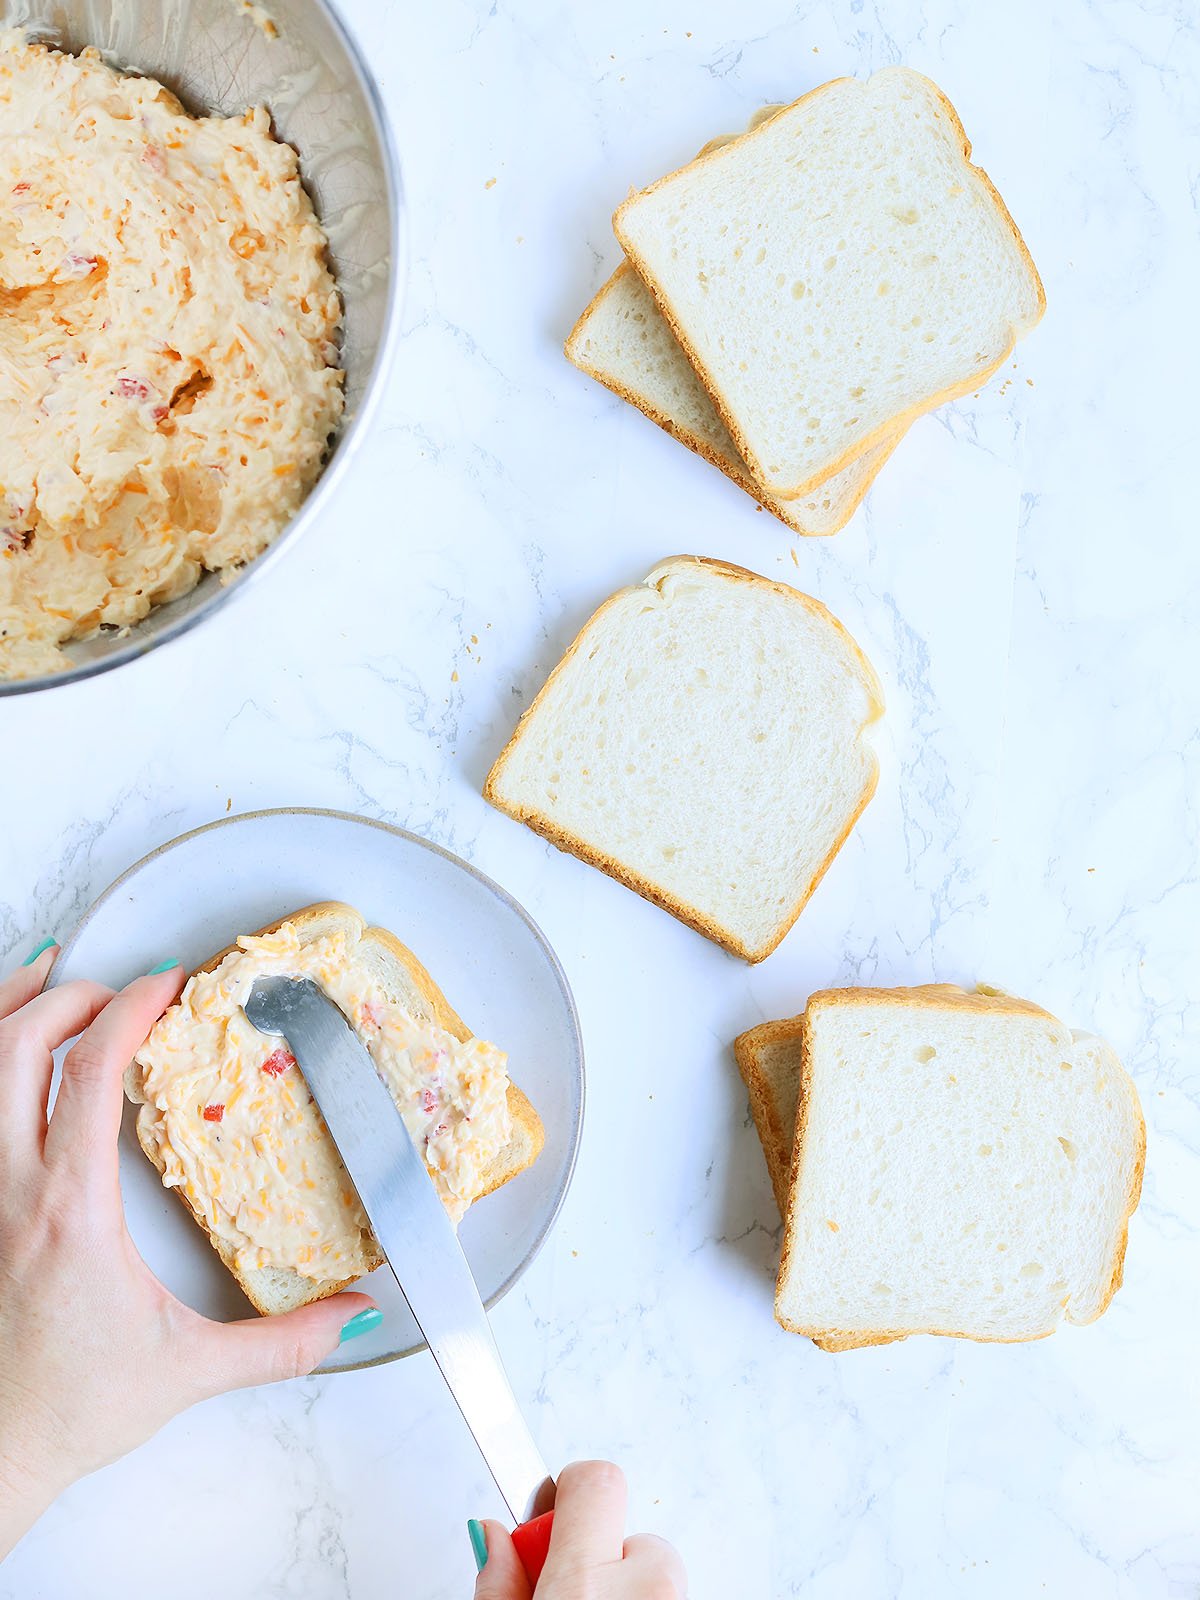 Hands spreading pimento cheese on slices of white bread.